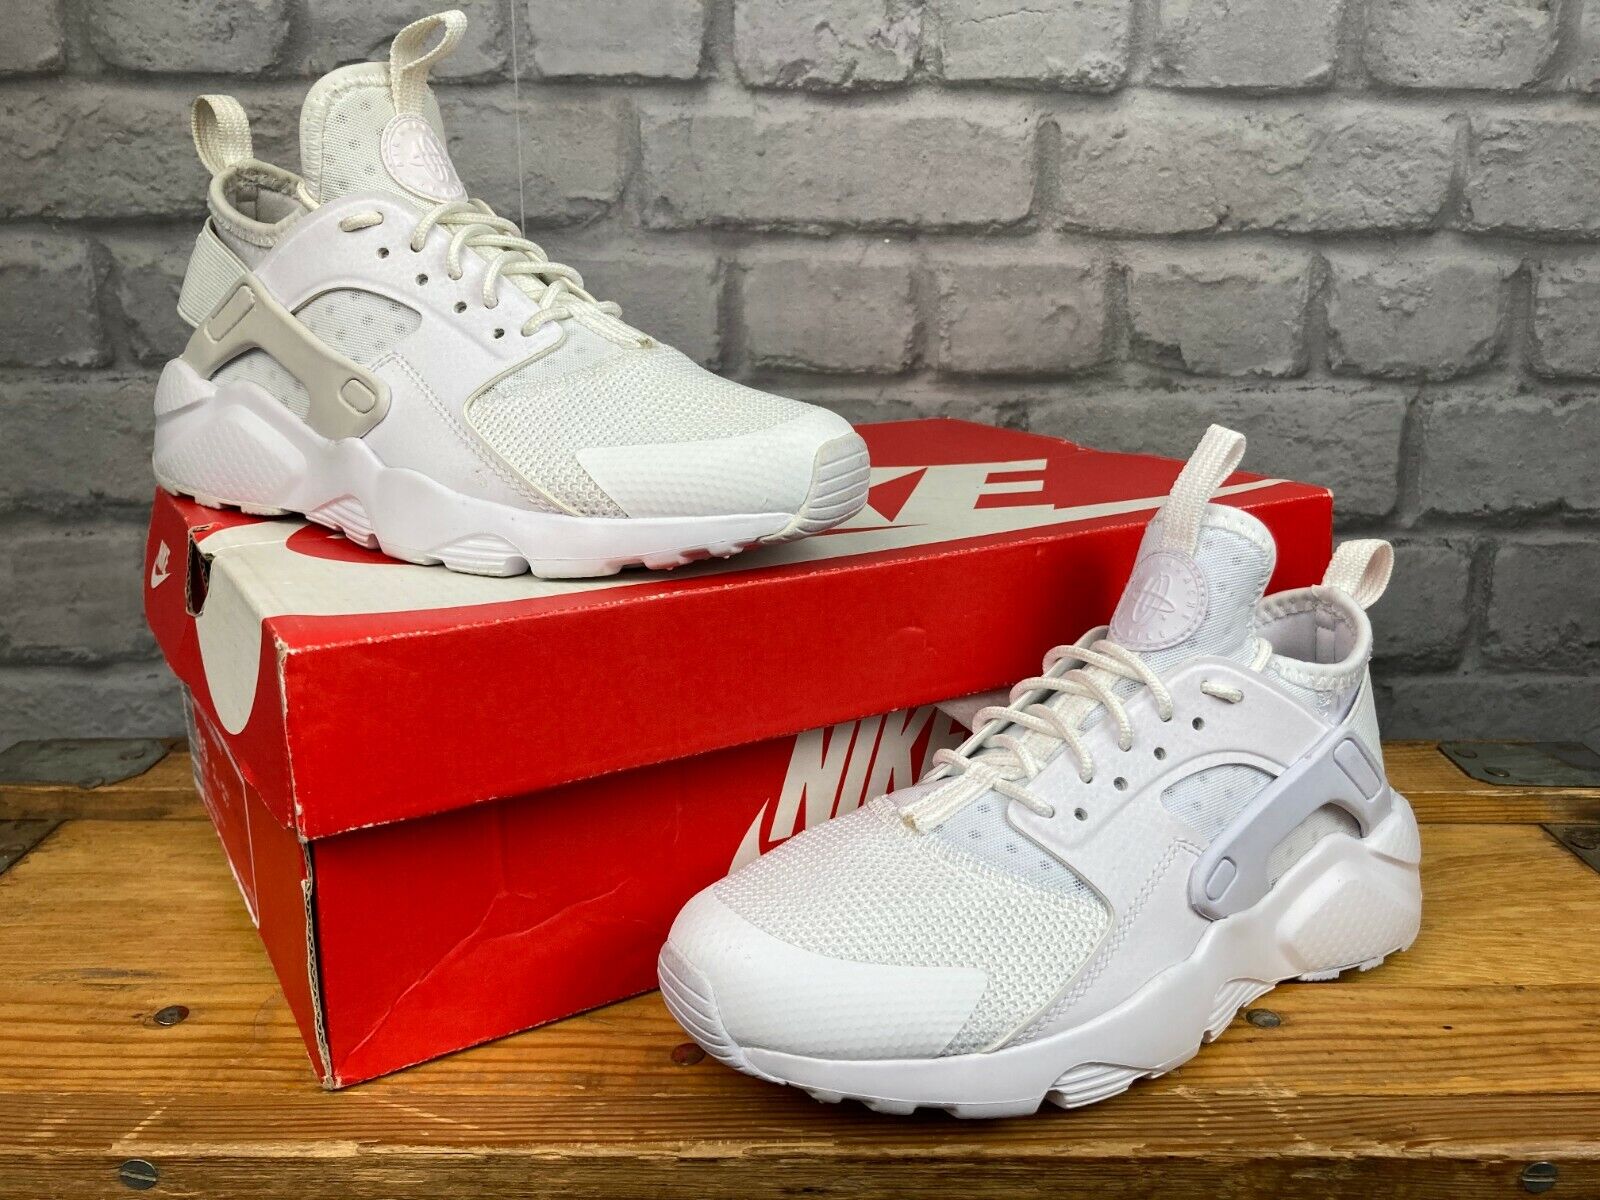 Resignación Andes recomendar NIKE AIR HUARACHE ULTRA BREATHE WHITE TRAINERS MANY SIZES CHILDRENS LADIES  T | eBay